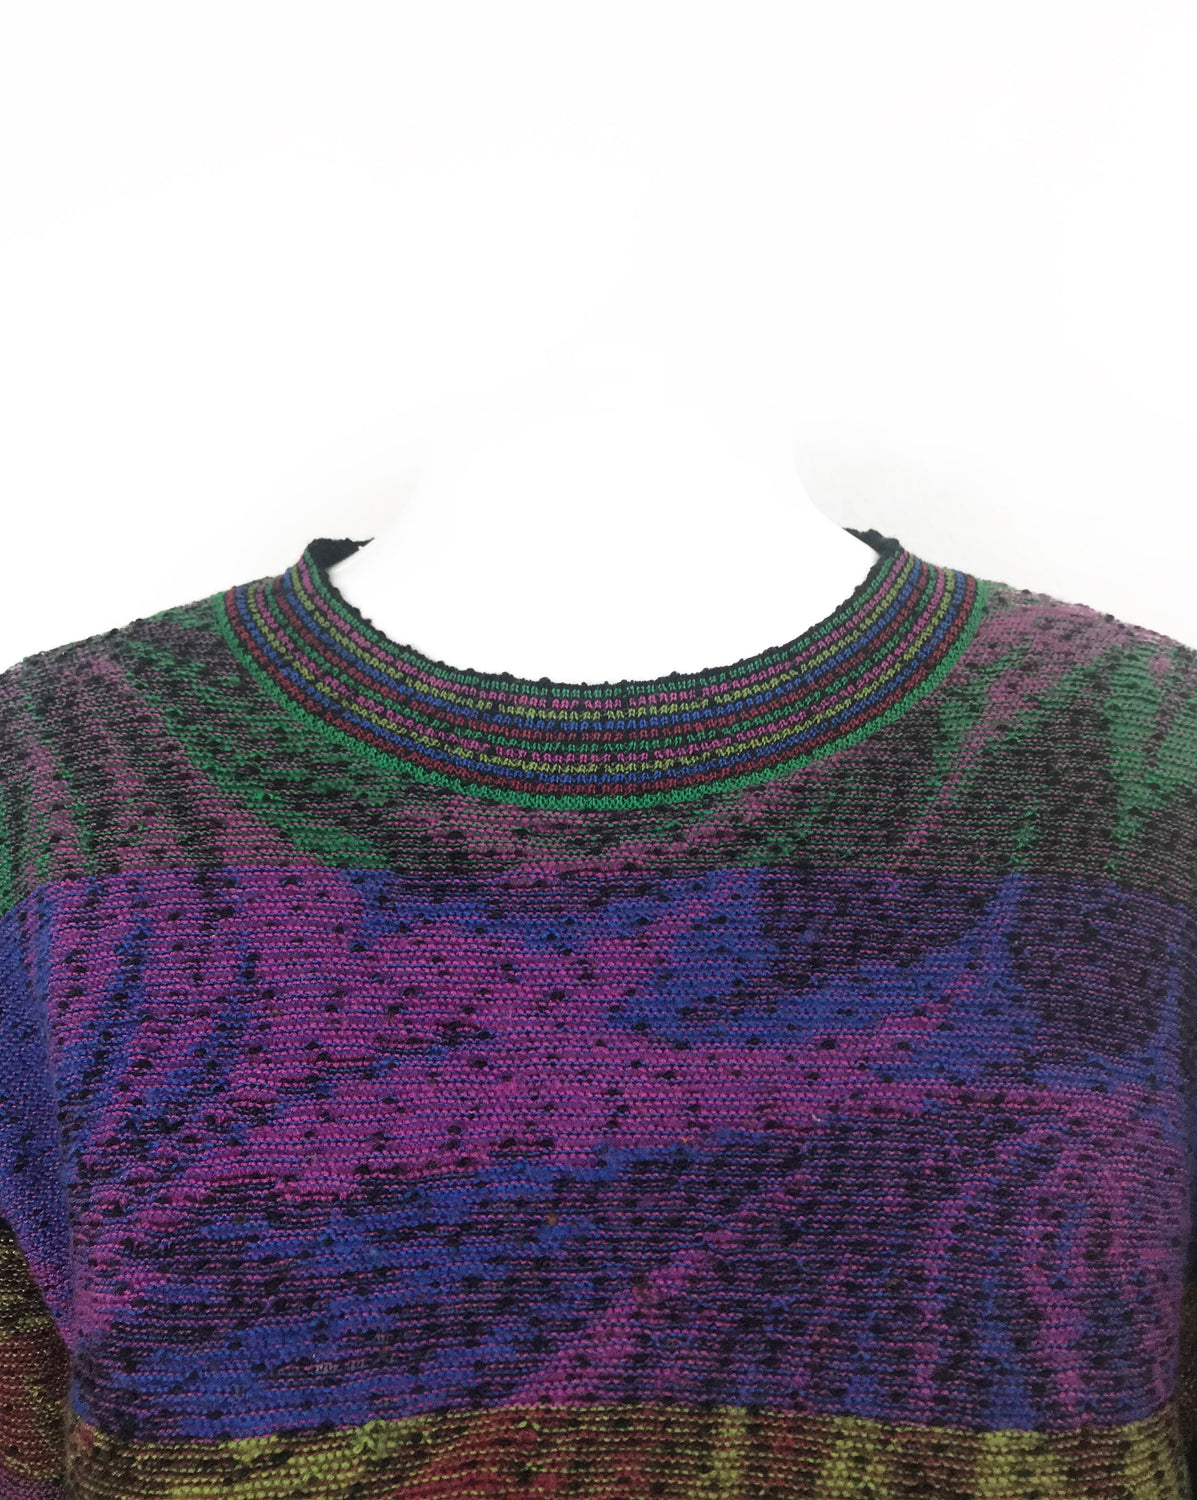 FRUIT Vintage Missoni 1980s knit sweater. Features a custom Missoni colourful print knit and banded cuff and hem.